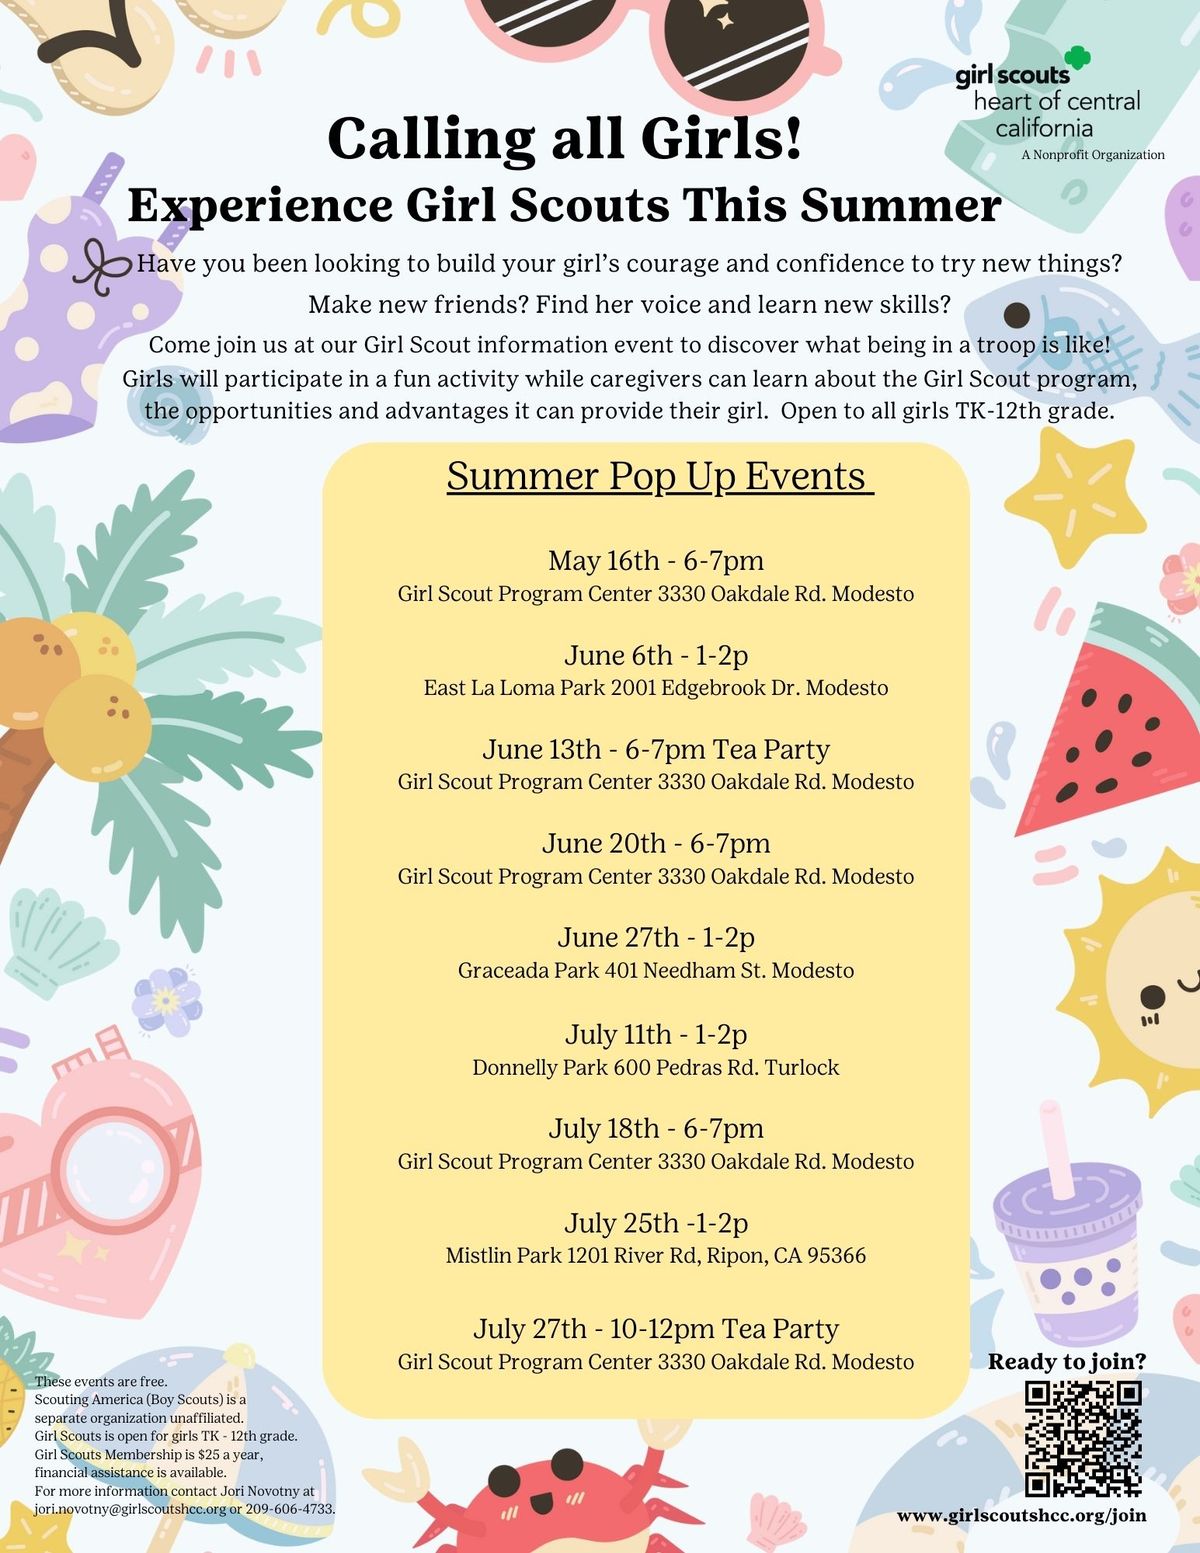 Tea Party with Girl Scouts